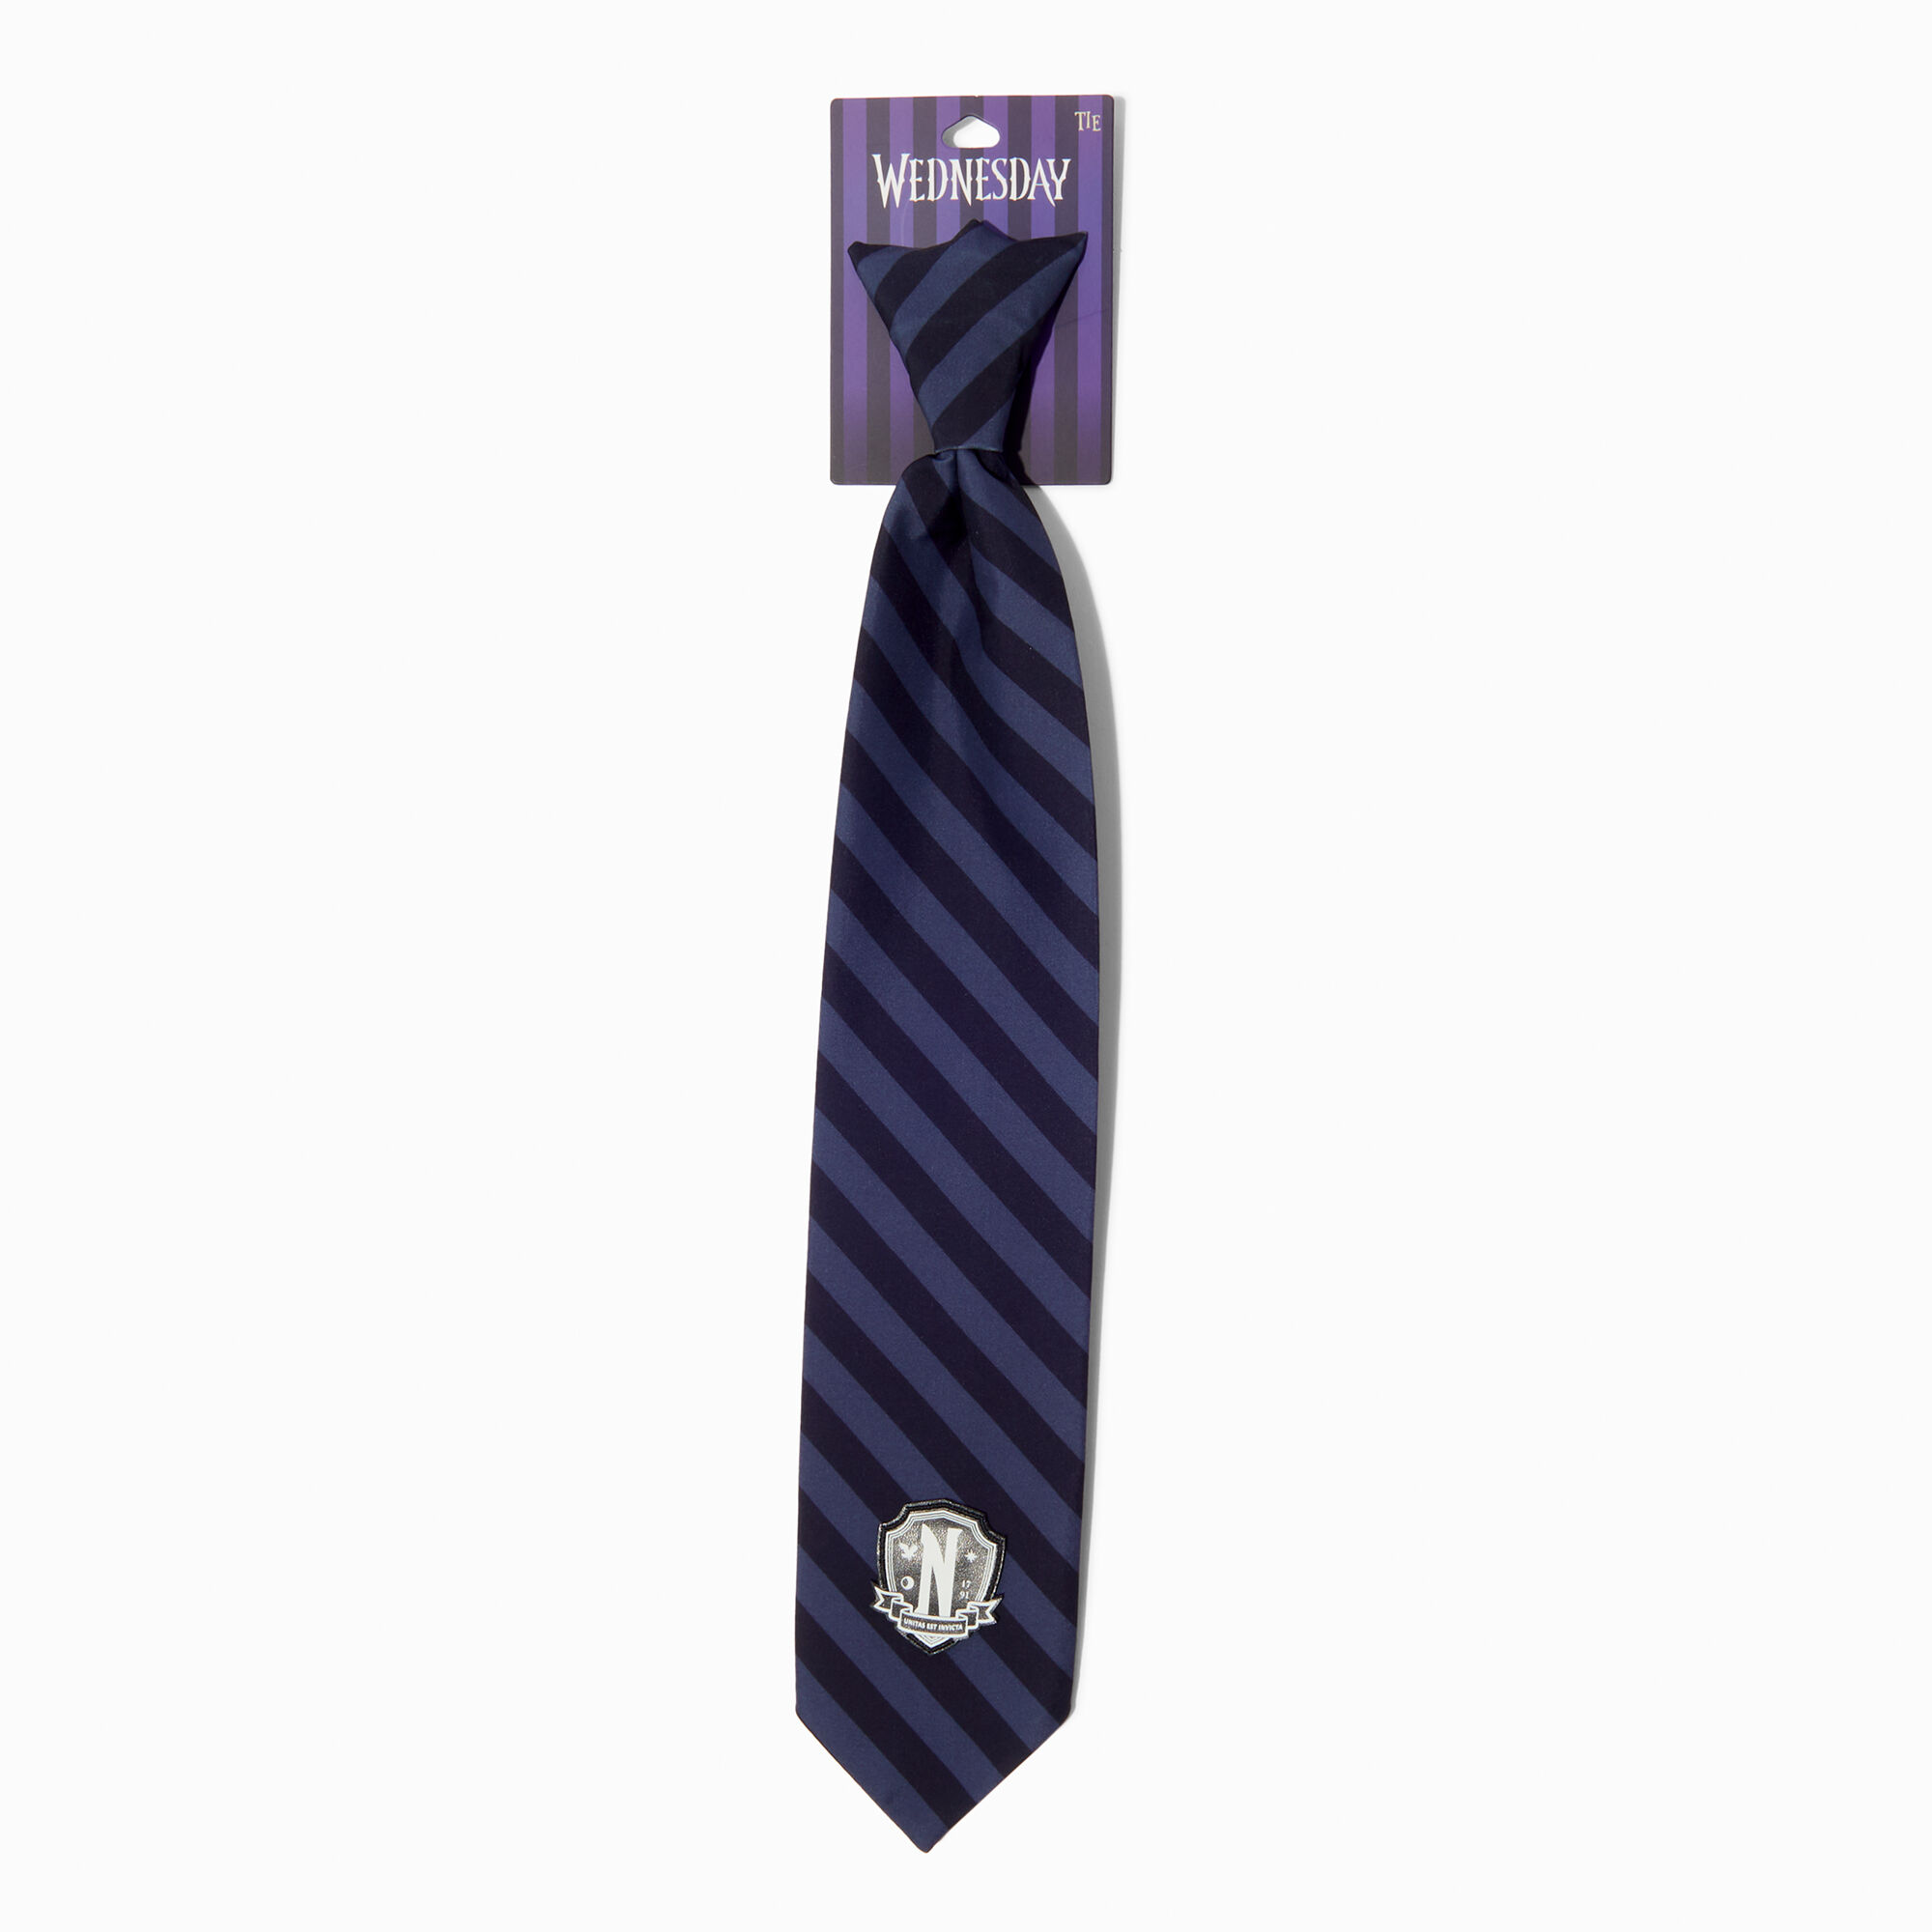 View Claires Wednesday Tie Black information